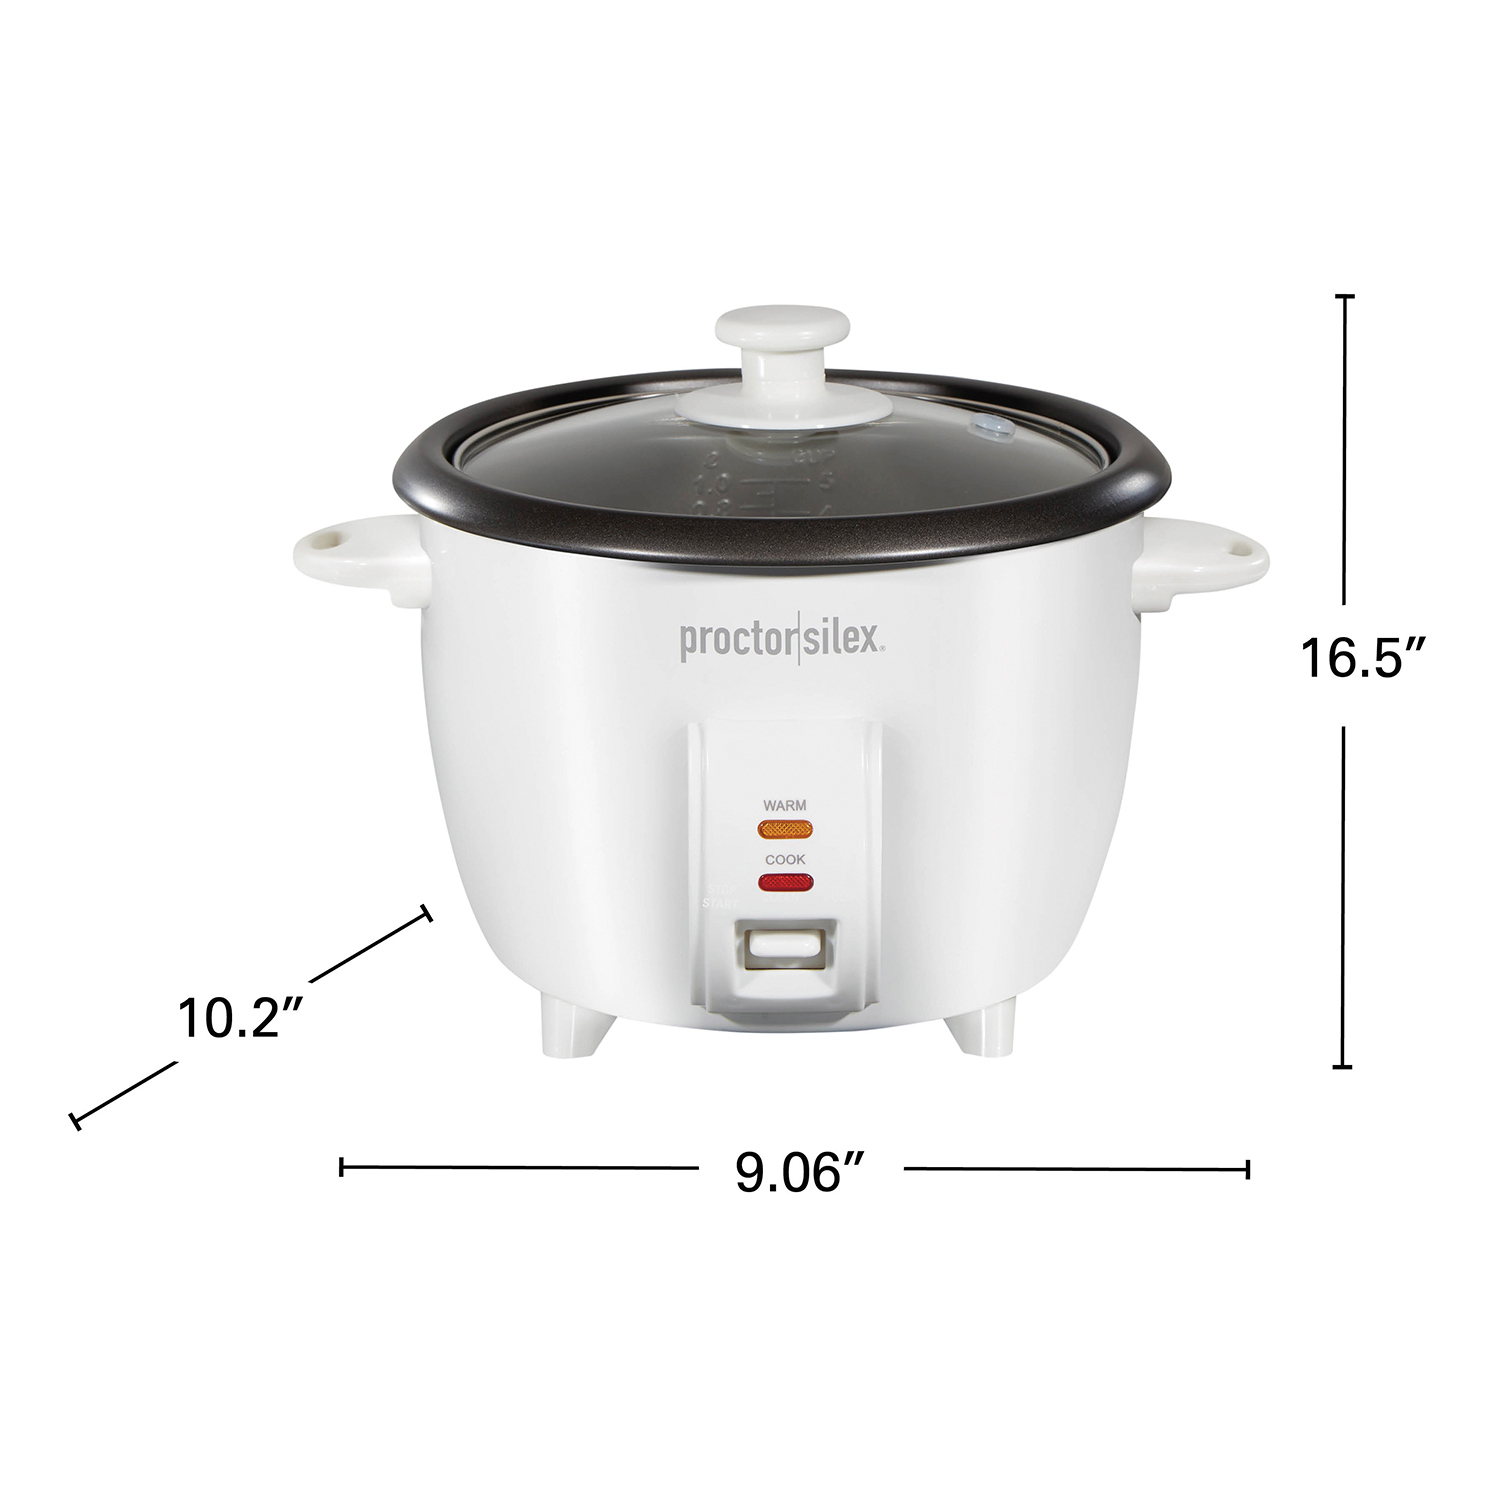 Proctor Silex 37540 40 Cup (20 Cup Raw) Rice Cooker / Warmer - 120V